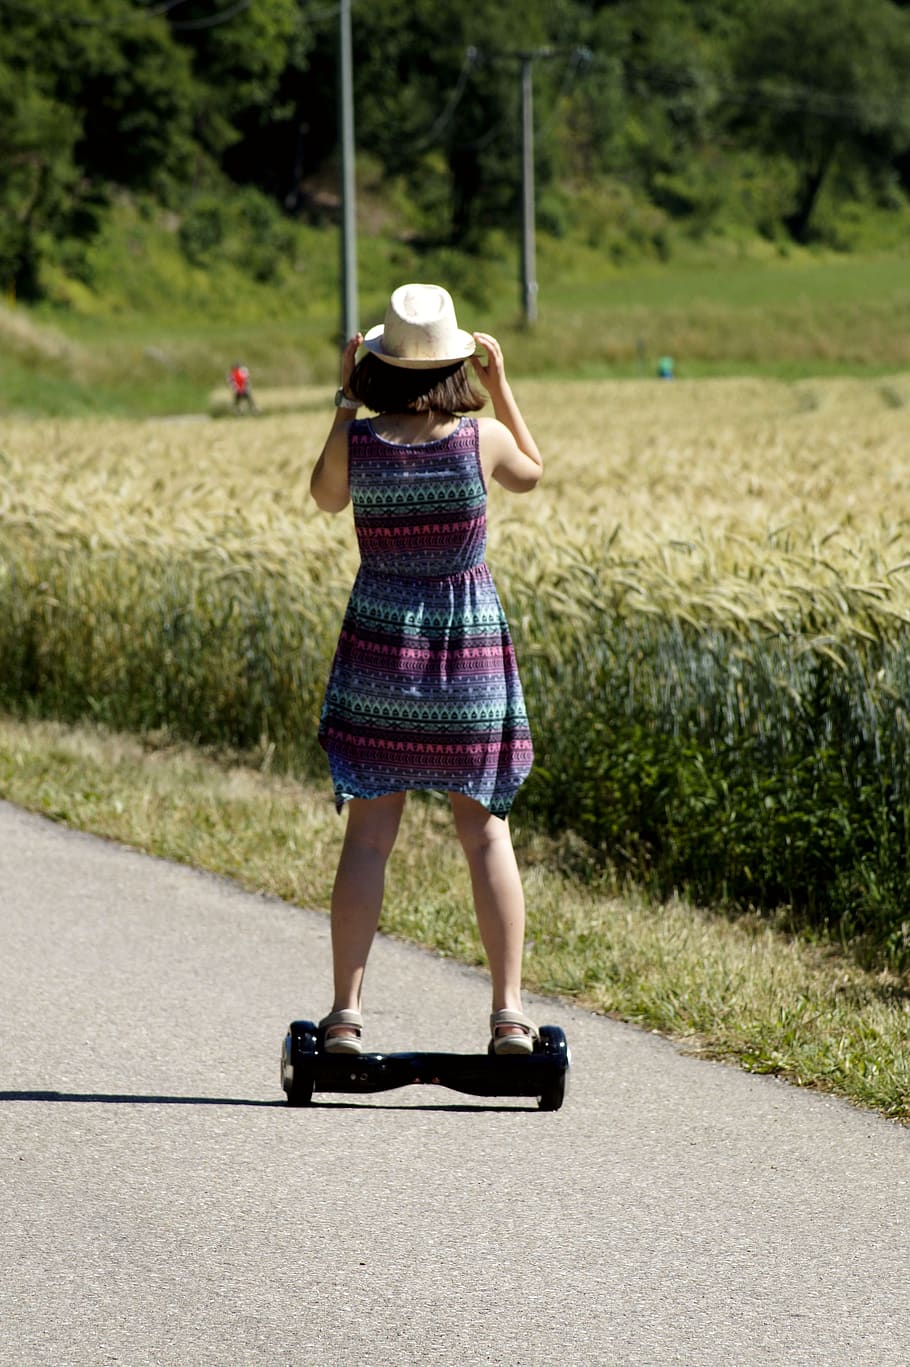 Hoverboard, Smart Wheels, E-board, Girl, Sport, One - Rainbow Gyrocopters Pro 4.0 Hoverboard - HD Wallpaper 